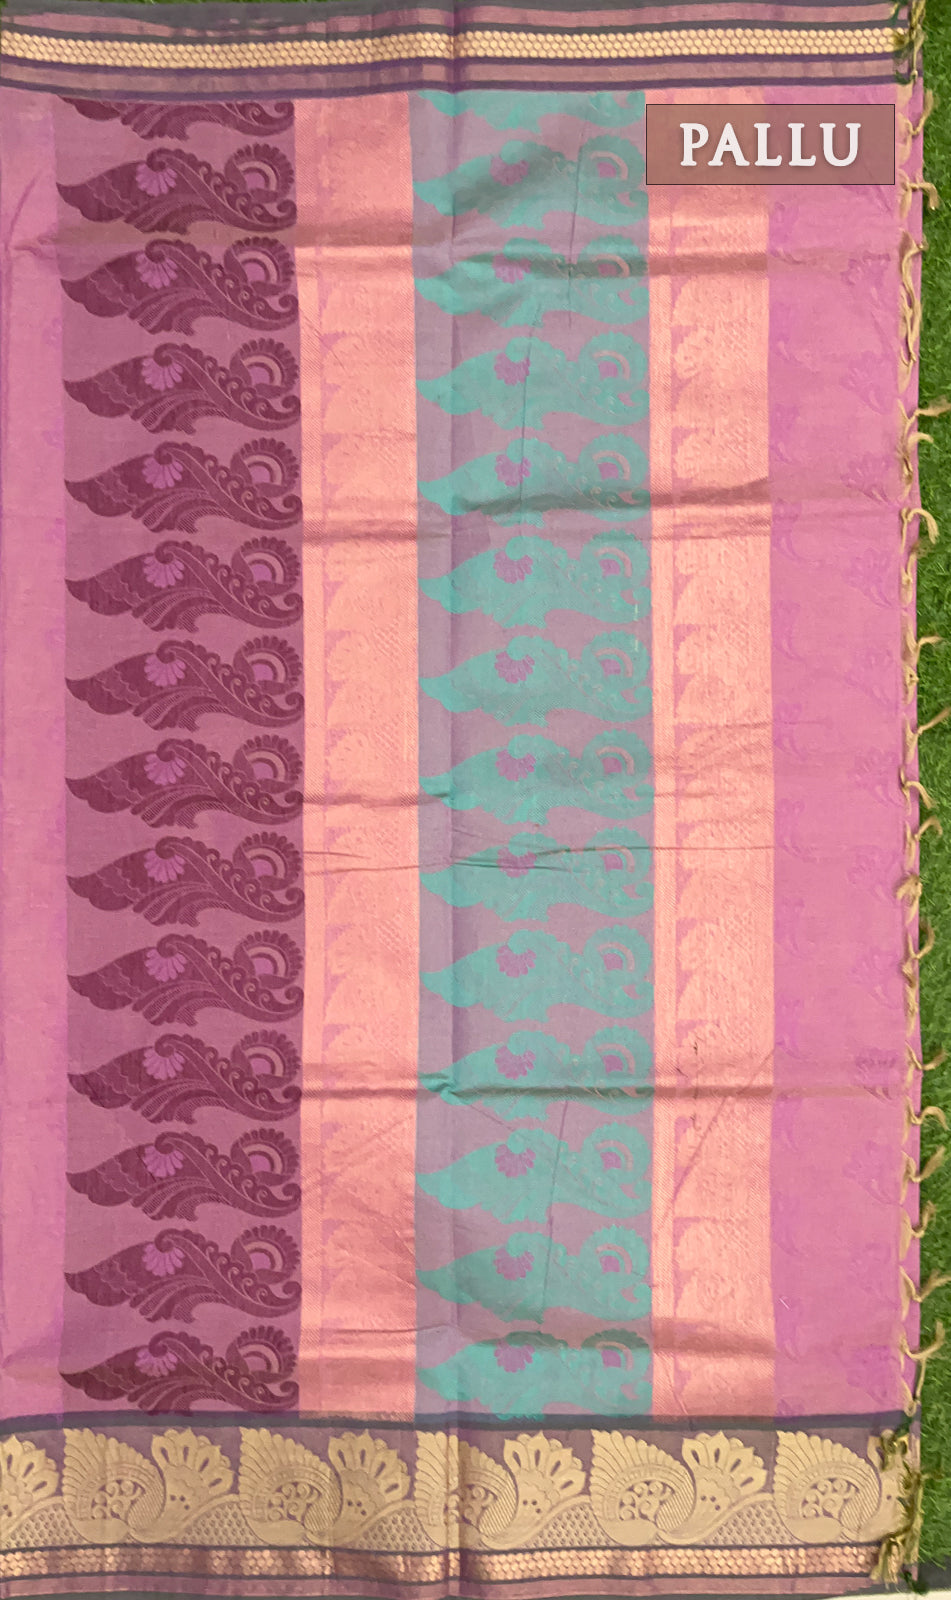 Pink and violet pure rich cotton saree